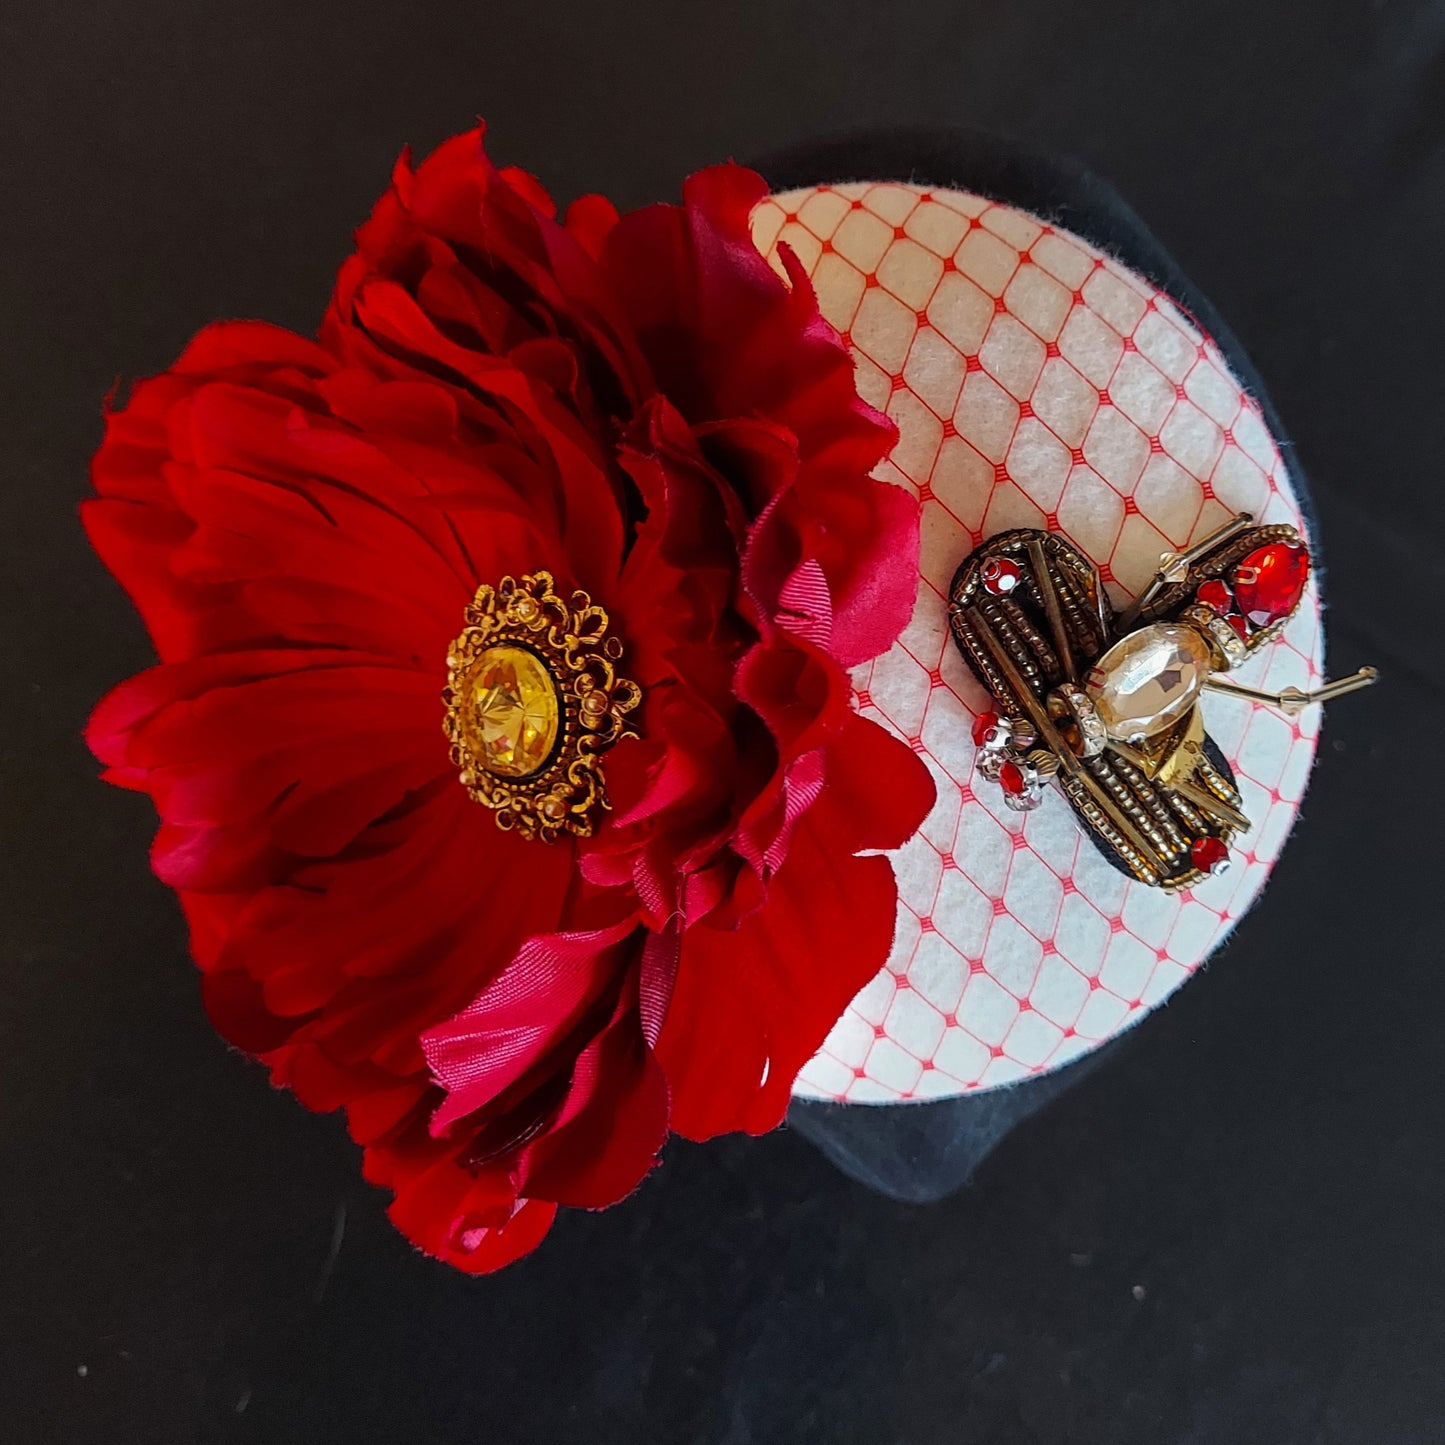 The Beauty & the Bee Fascinator